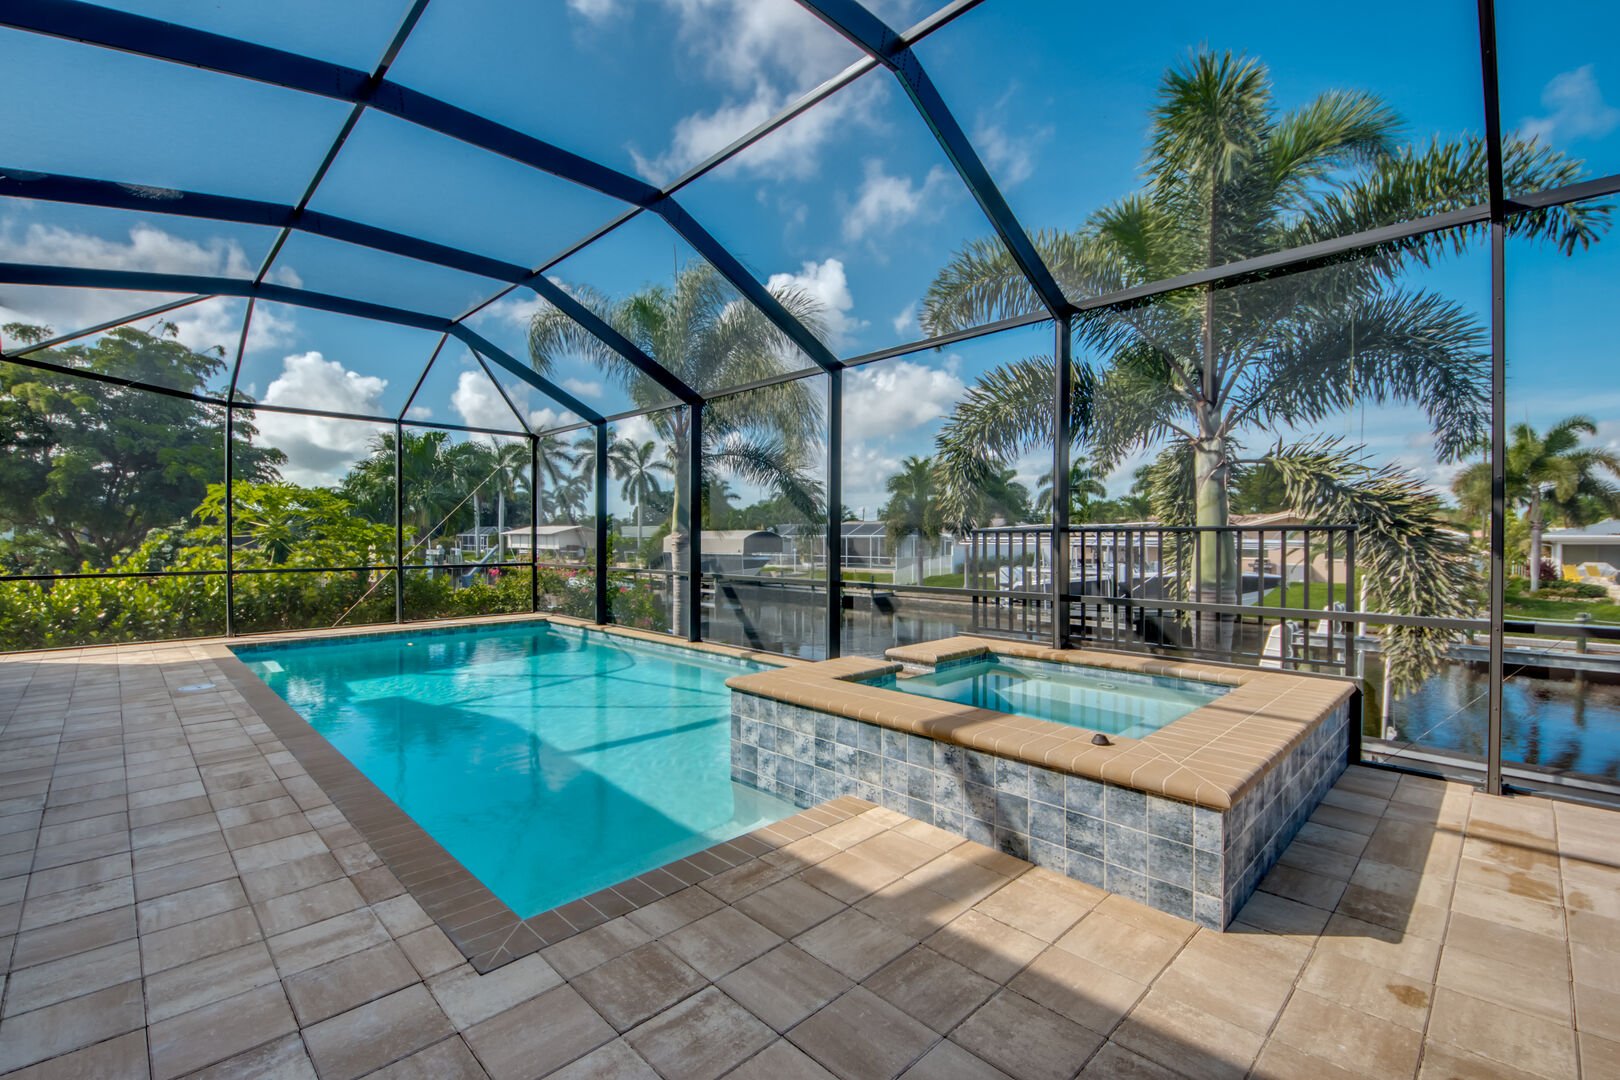 Heated pool and spa vacation rental